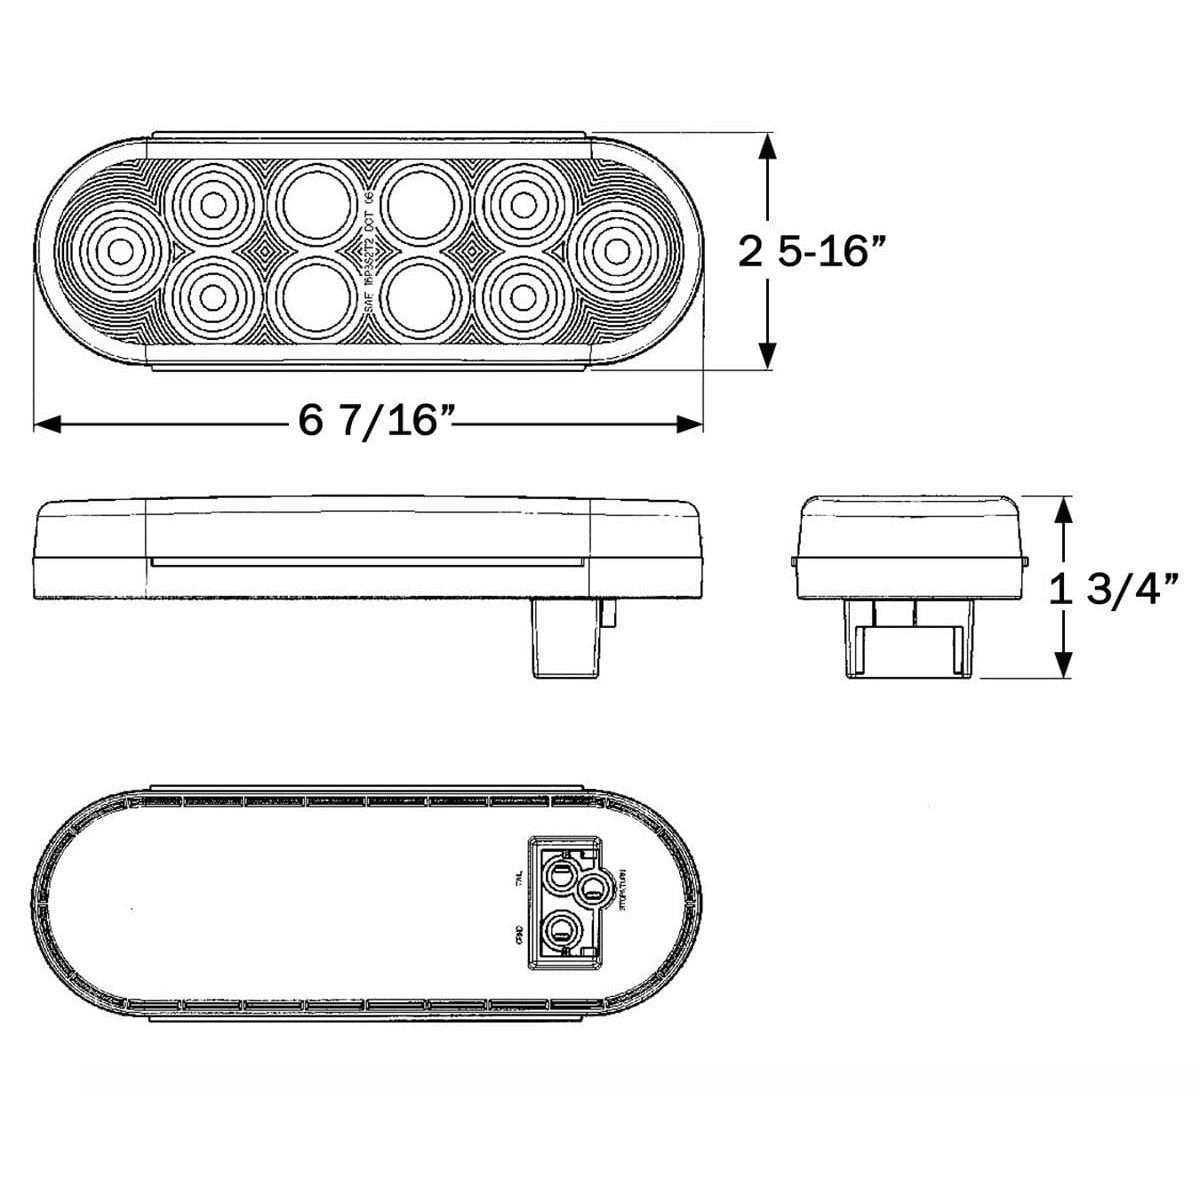 Optronics Qualifies for Free Shipping Optronics 10 LED 6" Oval Tail Light Kit #STL74RKBP